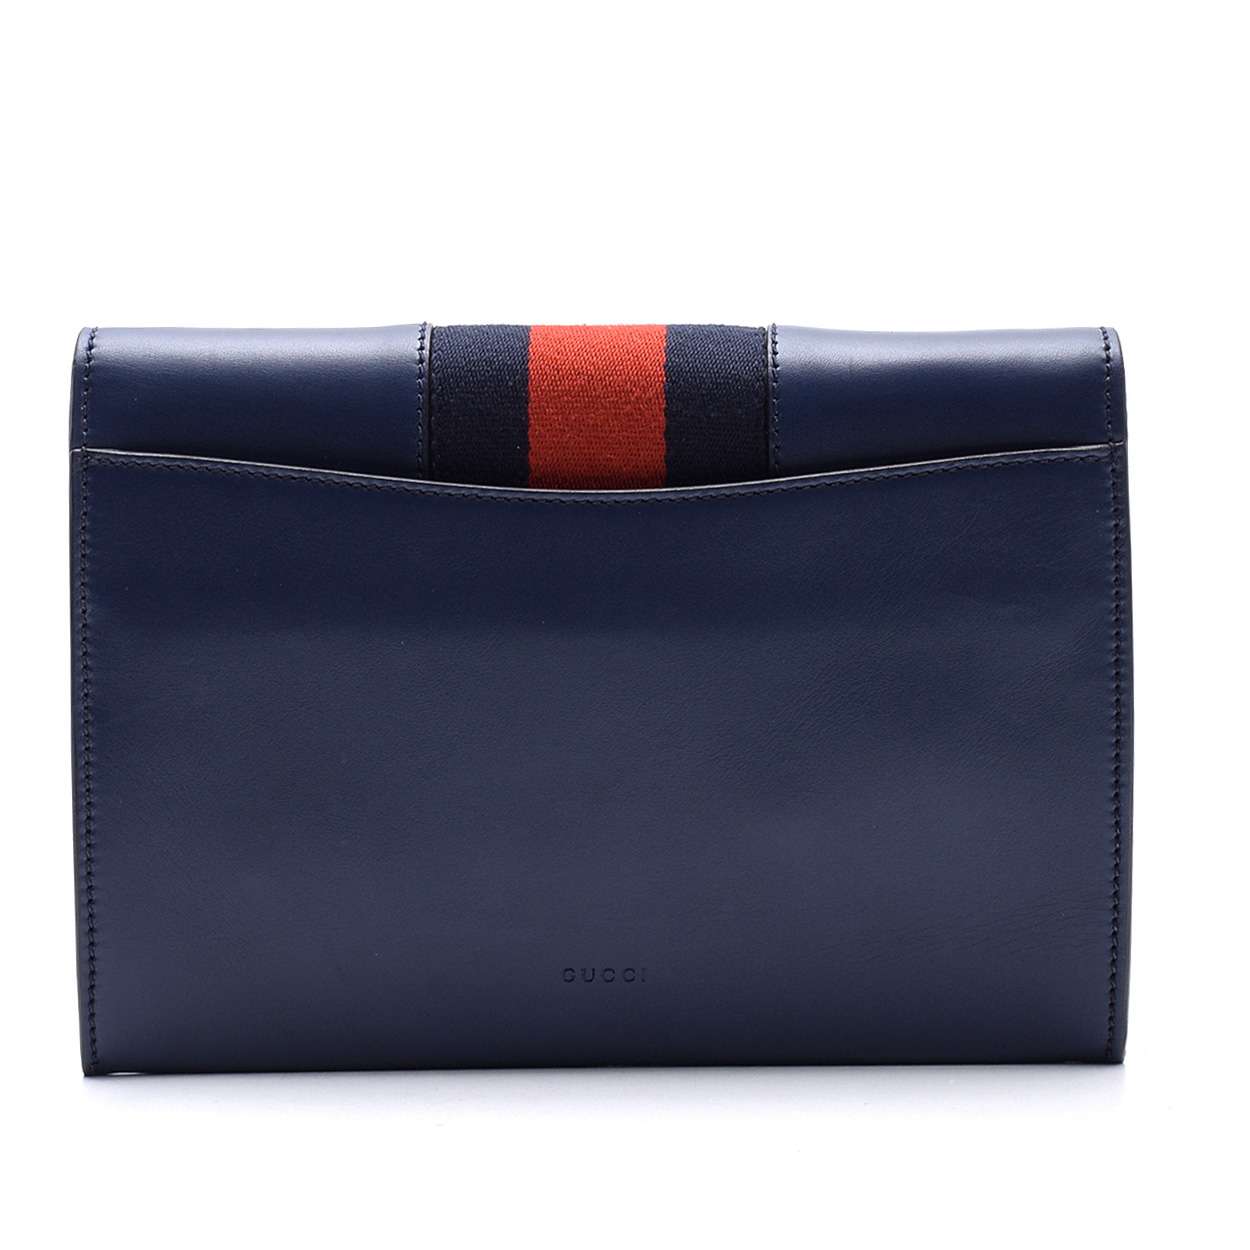 Gucci - Navy Blue Sylive Signature Webbing and Curb Chain Clutch